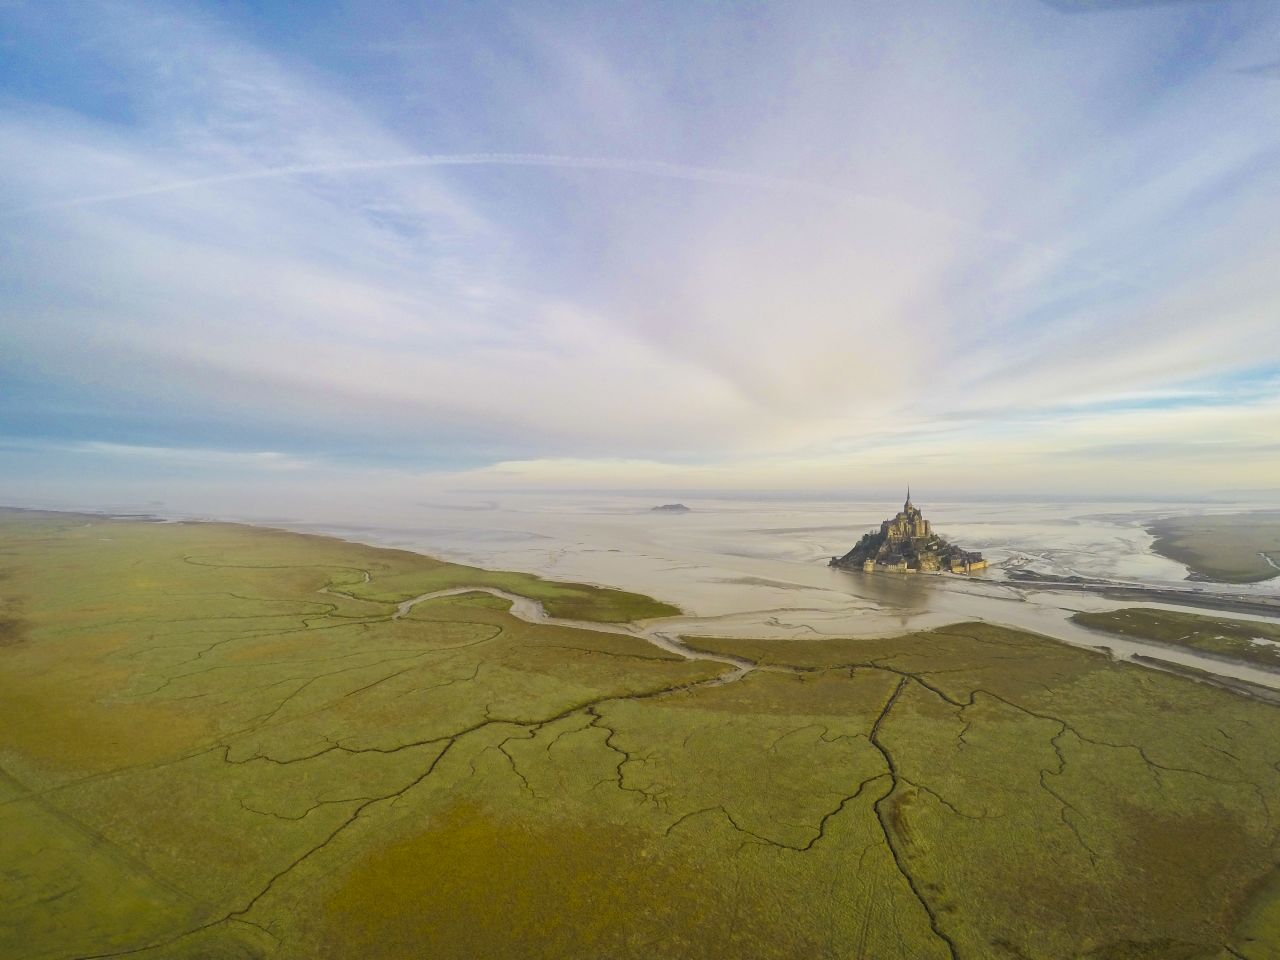 It might appear like a magical landscape from Lord of the Rings, but Mont Saint-Michel is in fact an island commune on the northwest coast of France. 